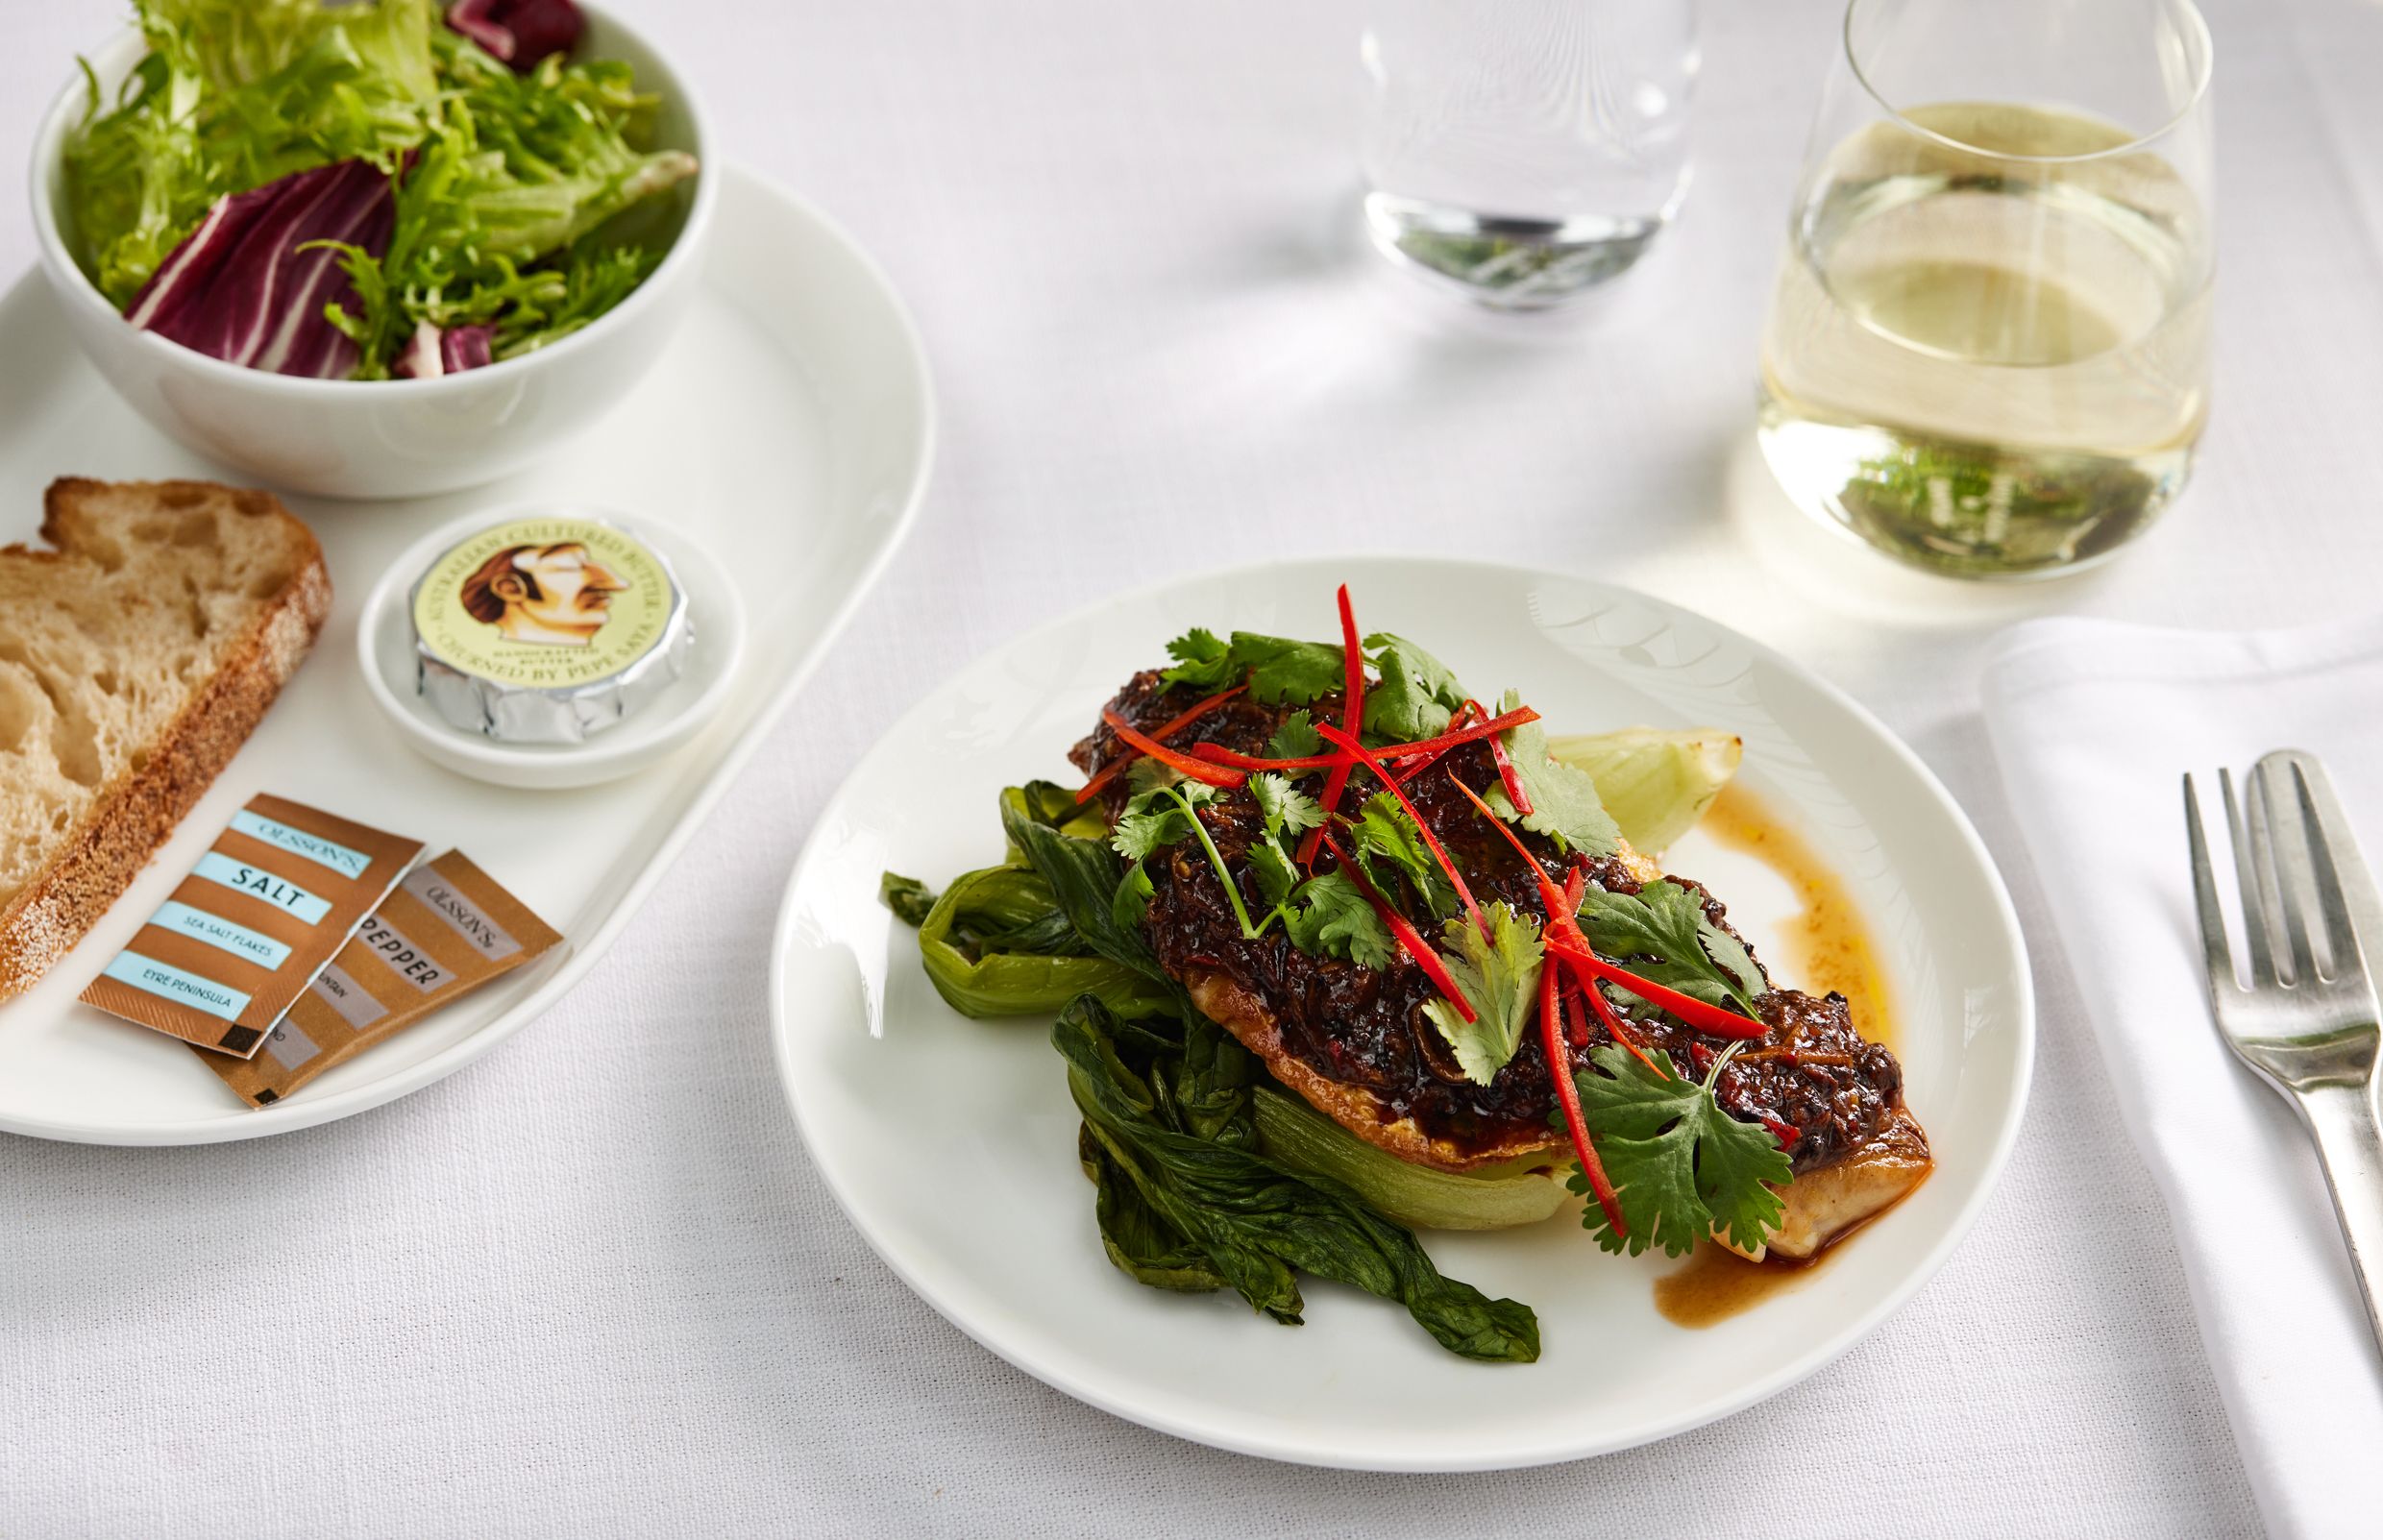 Qantas Seared Snapper with black bean sauce, seasonal greens and salted chilli (International Business)